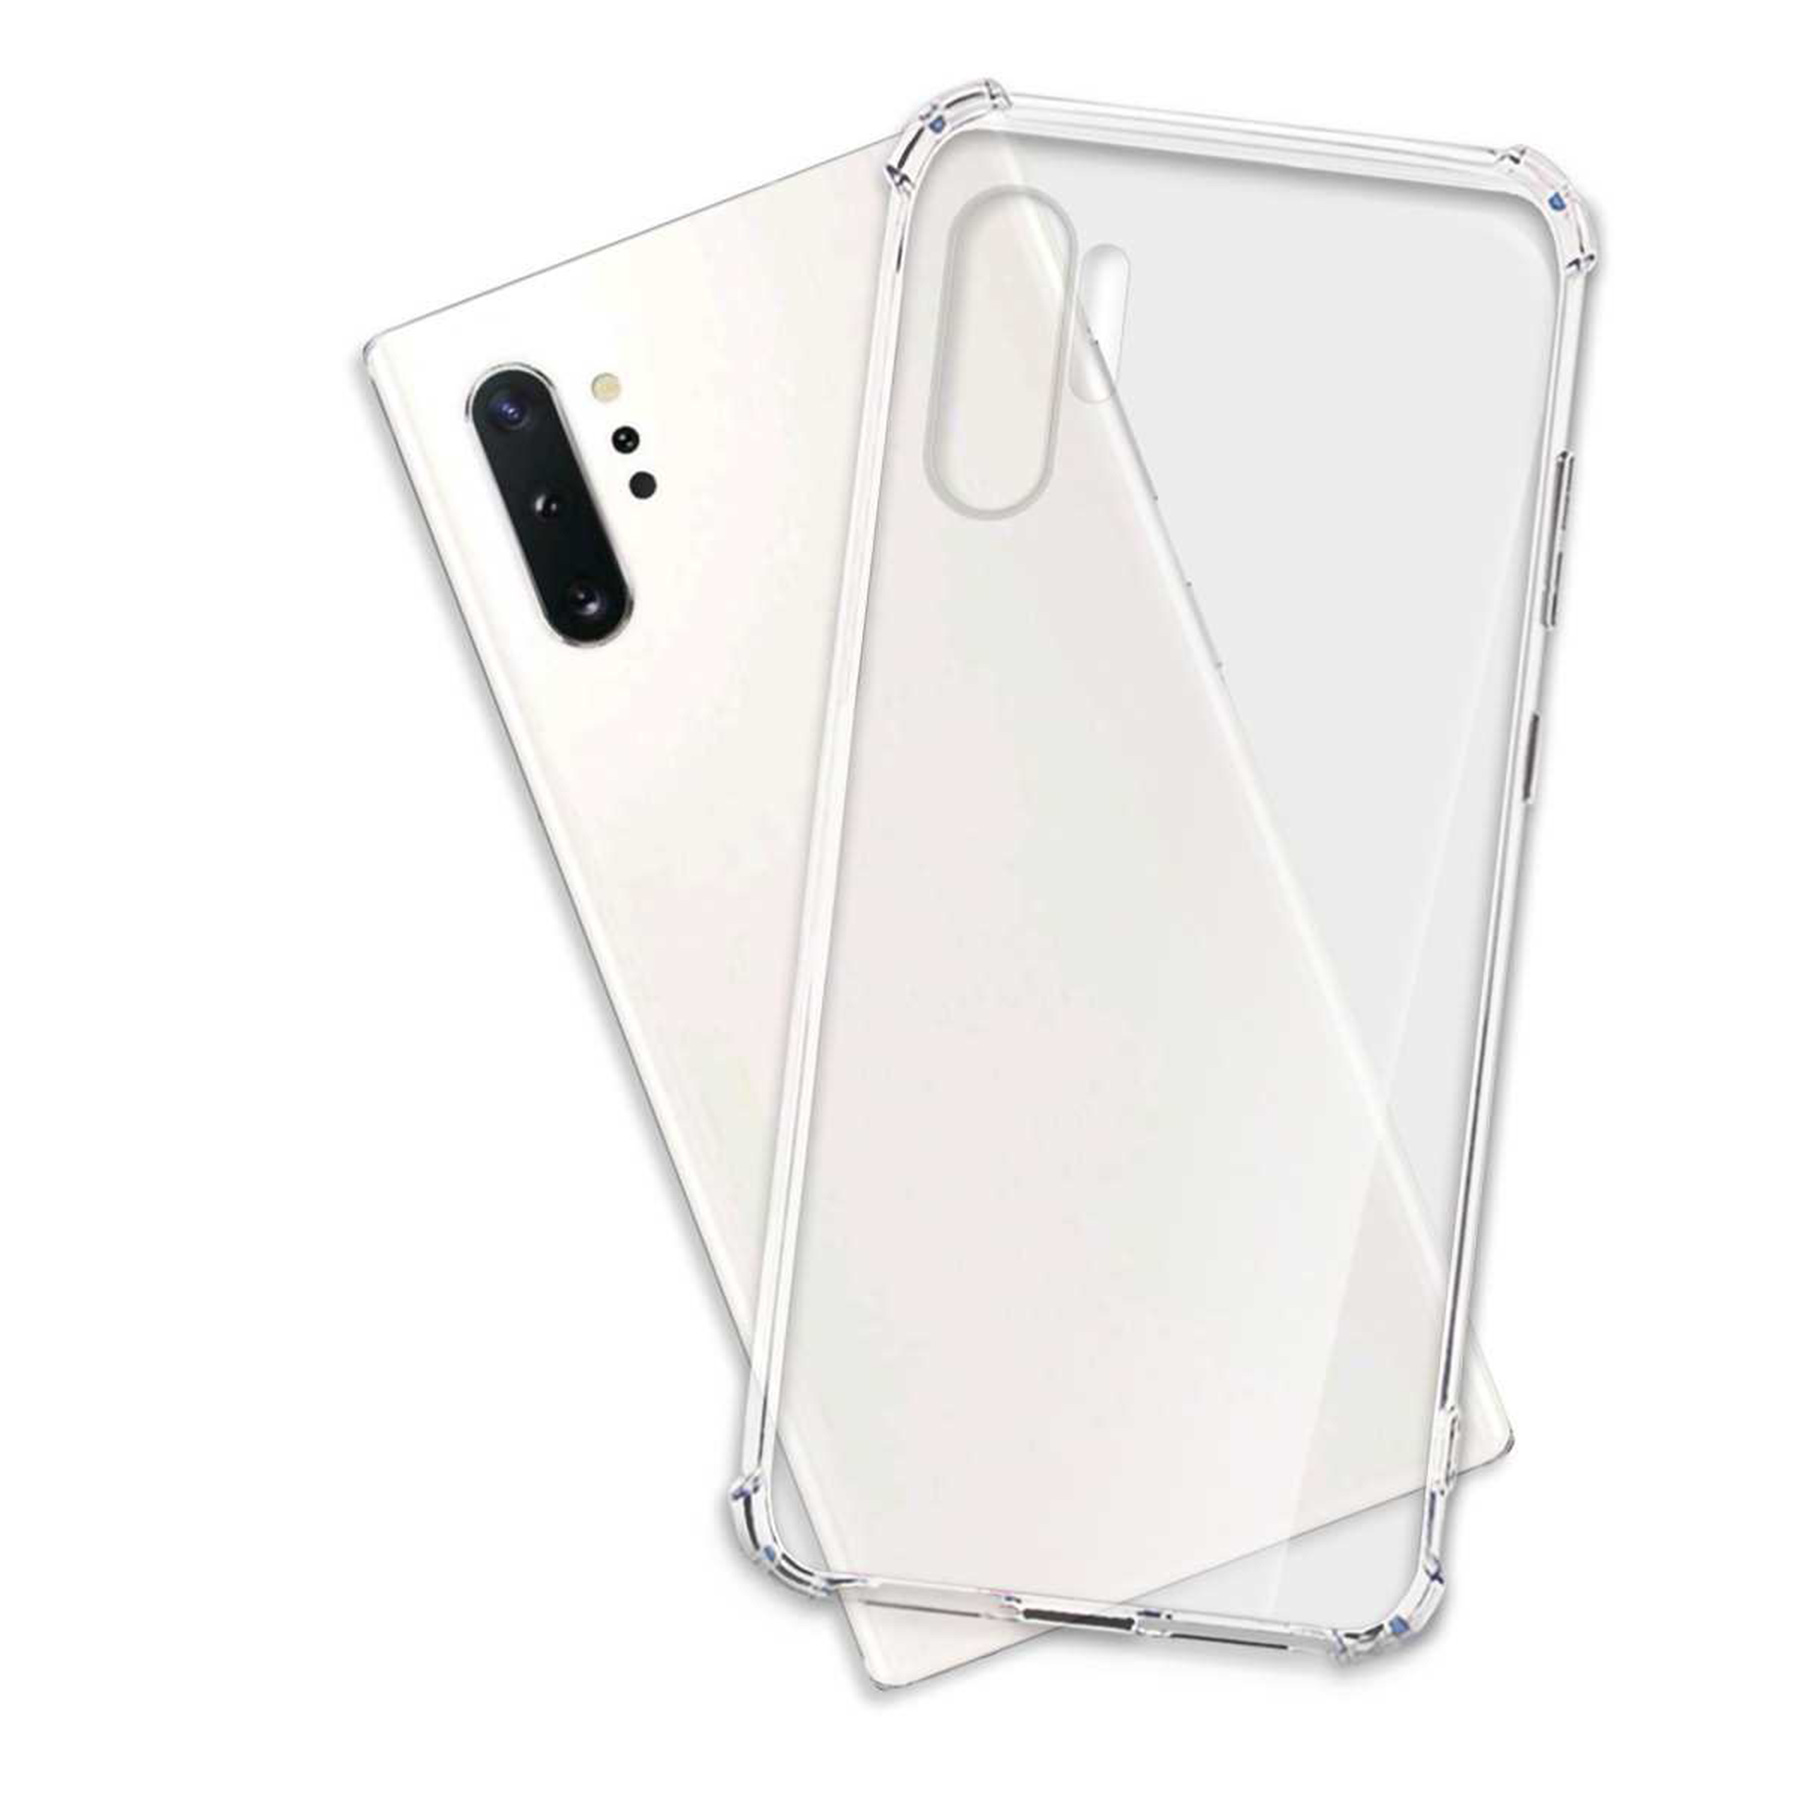 MTB MORE ENERGY Clear Armor Transparent Galaxy Plus Case, 10 Note Note Plus Samsung, 5G, Backcover, 4G, 10